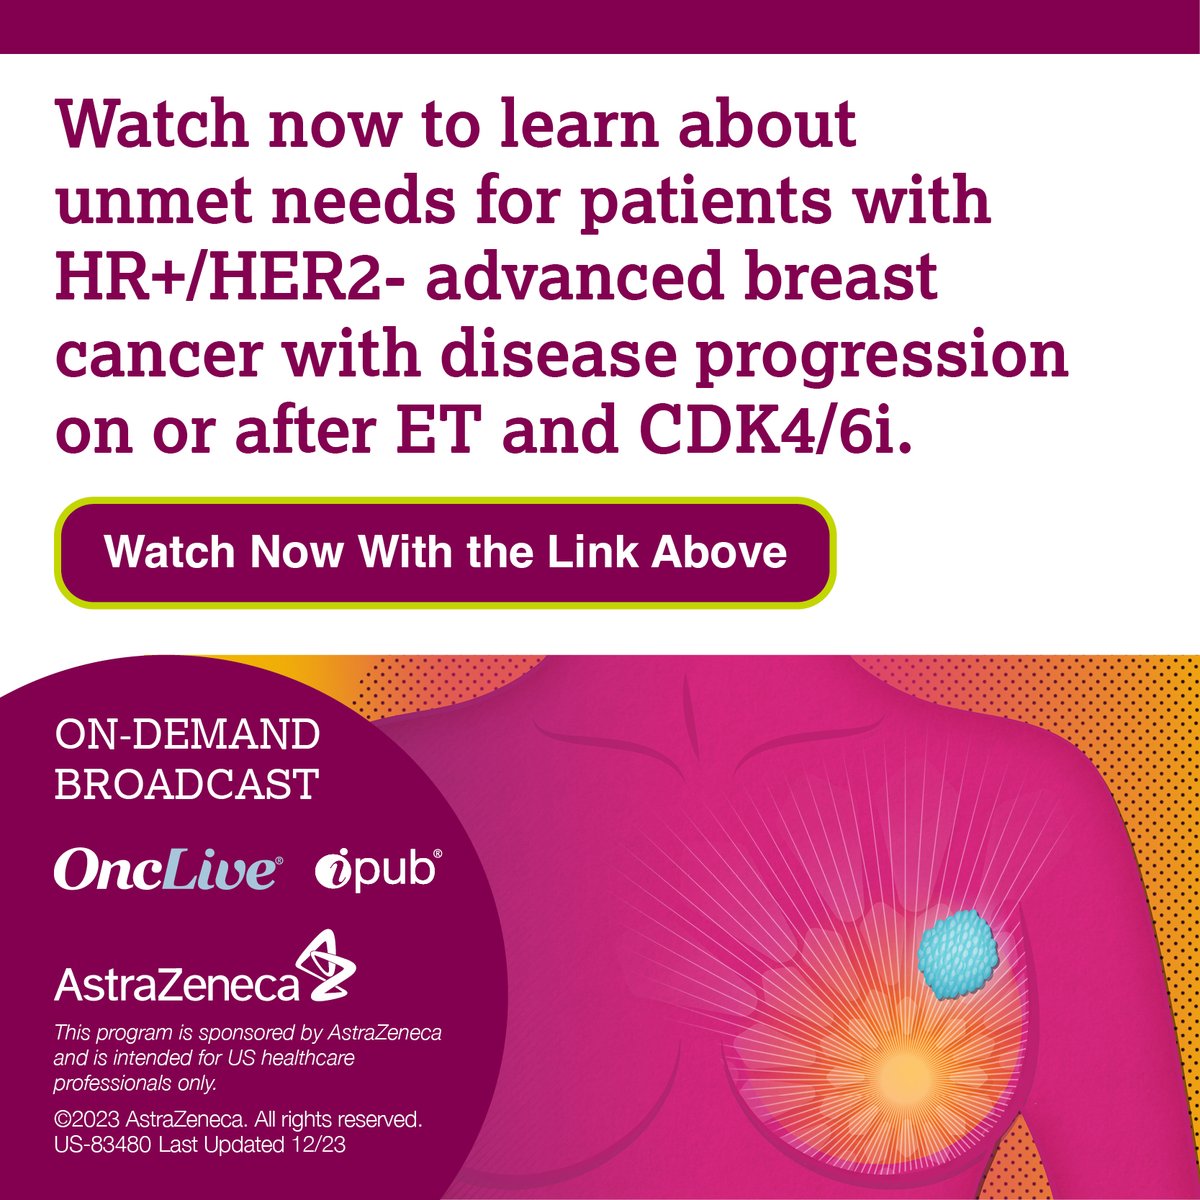 Watch the on-demand broadcast to discover unmet needs in the 2L treatment of HR+/HER2- advanced breast cancer and the role of the PI3K/AKT/PTEN pathway in endocrine therapy resistance. bit.ly/47WHmzI